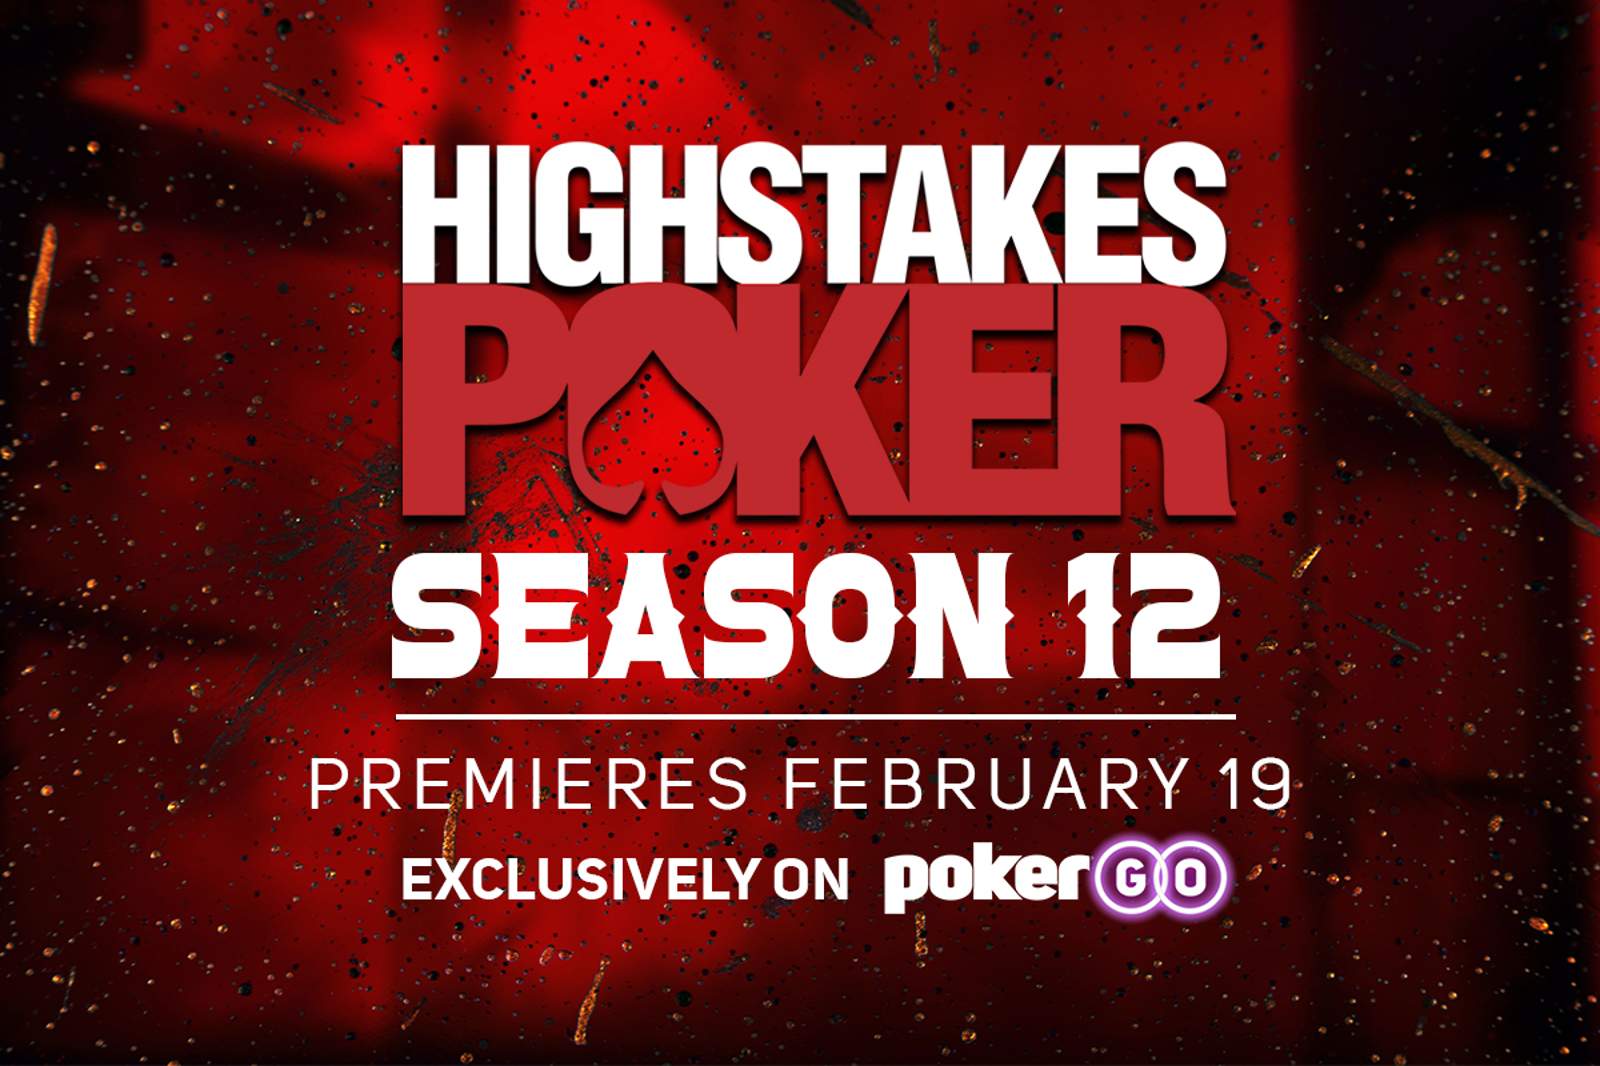 Season 12 of High Stakes Poker, Poker’s Most Iconic Cash Game Show, Premieres February 19 On PokerGO®